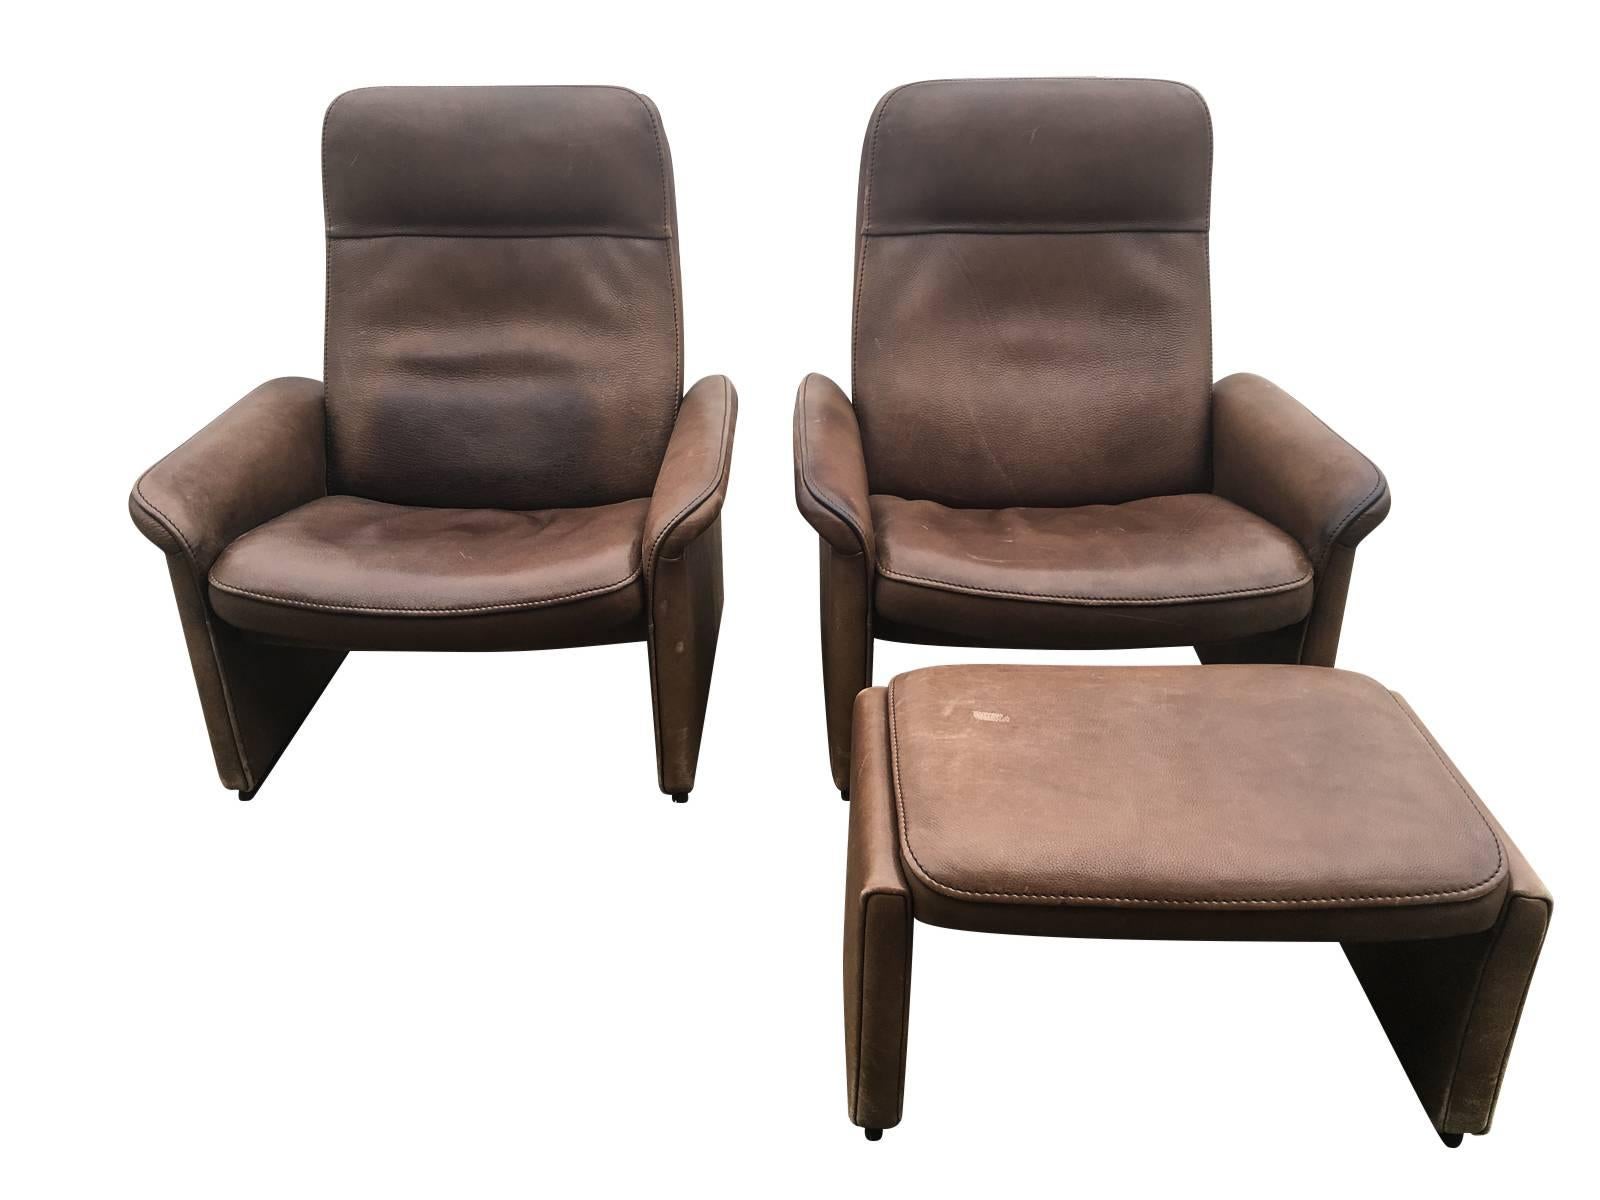 Pair of reclining leather lounge chairs manufactured by De Sede, Switzerland in thick buffalo leather. One ottoman included.